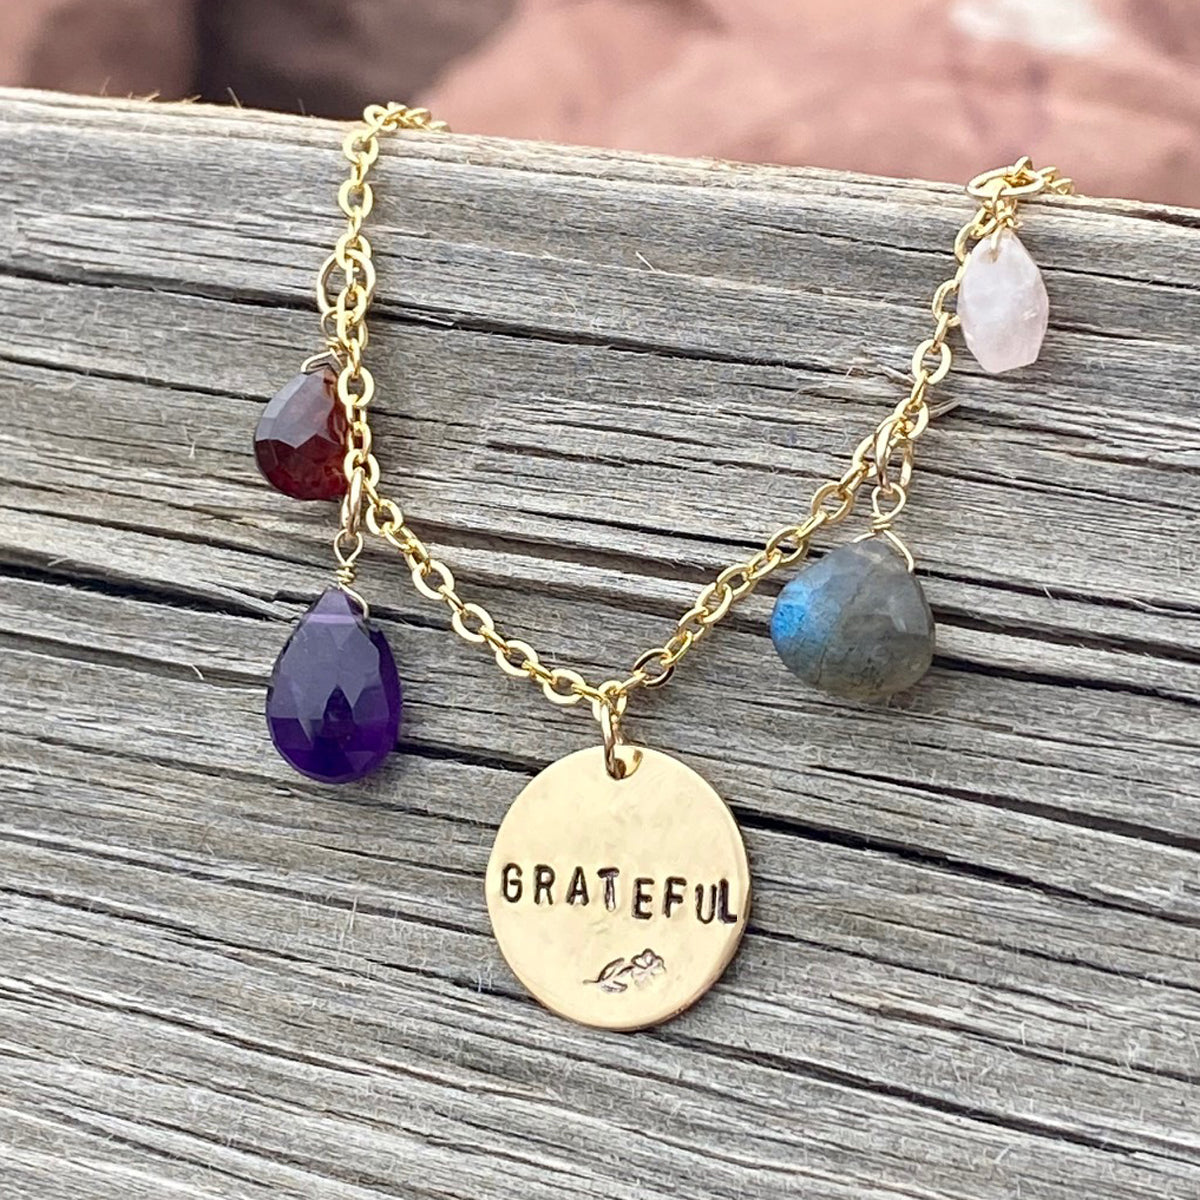 GRATEFUL Motivational Gold Necklace with Healing Crystals for Gratitude Practice. What are grateful for? It has been Scientifically proven, having a gratitude practice  increases happiness and empathy, reduce depression and anxiety.  Gratitude is an Attitude. ⁣⁣Wear these crystals for cultivating Gratitude.